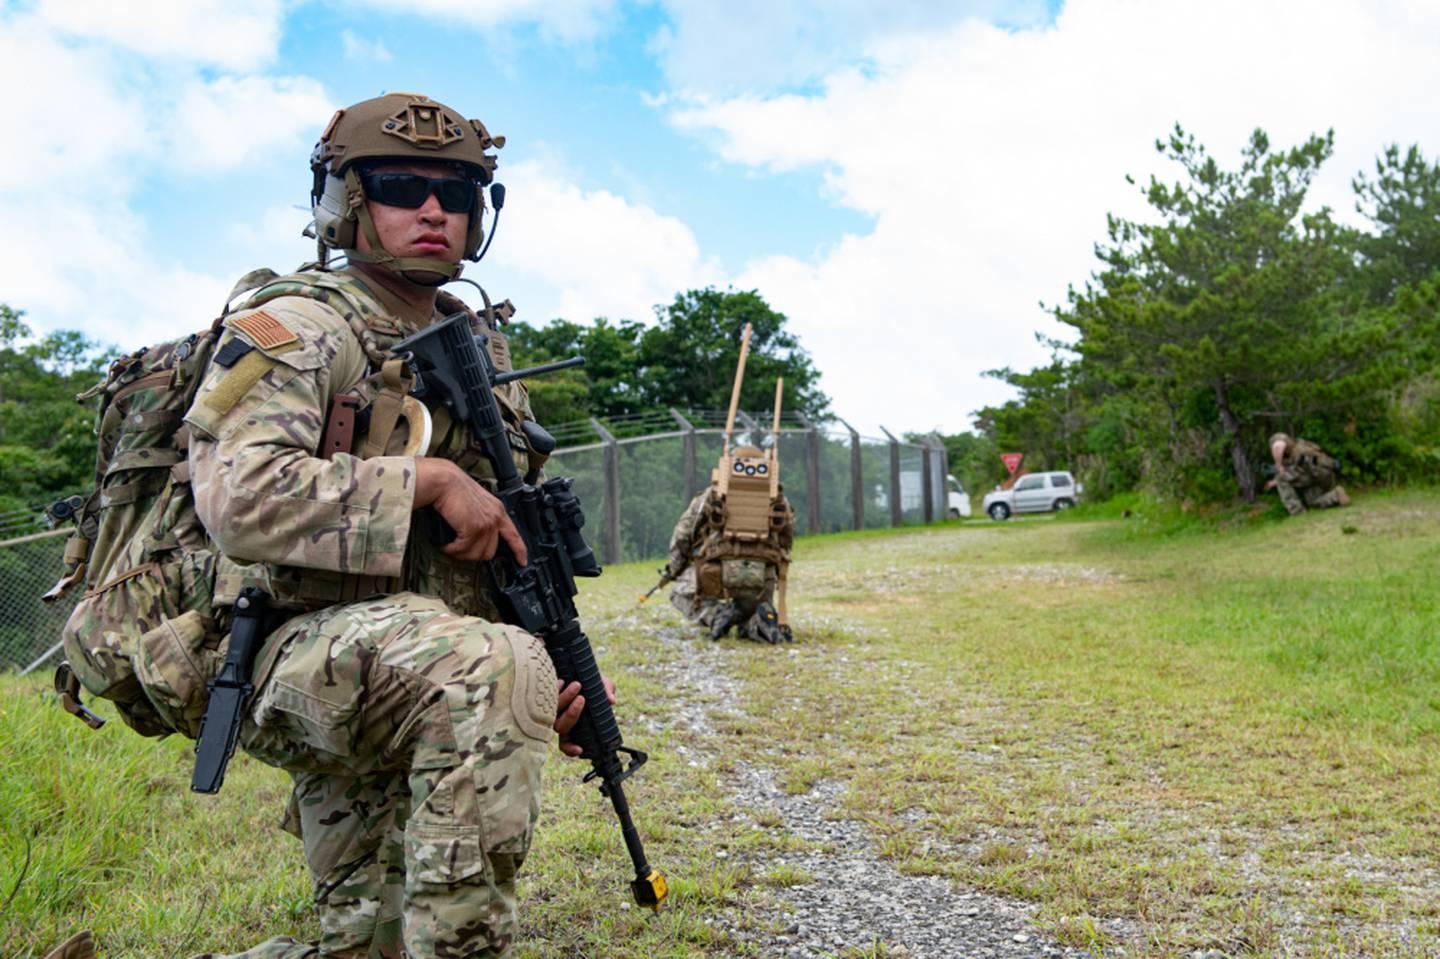 Senior Airman Miguel Ramirez, an Explosive Ordnance Disposal technician from the 18th Civil Engineer Squadron, provides security while on patrol during an Improvised Explosive Device training event on Kadena Air Base, Japa Enlisted airmen can earn up to $360,000 in retention bonuses in these fields